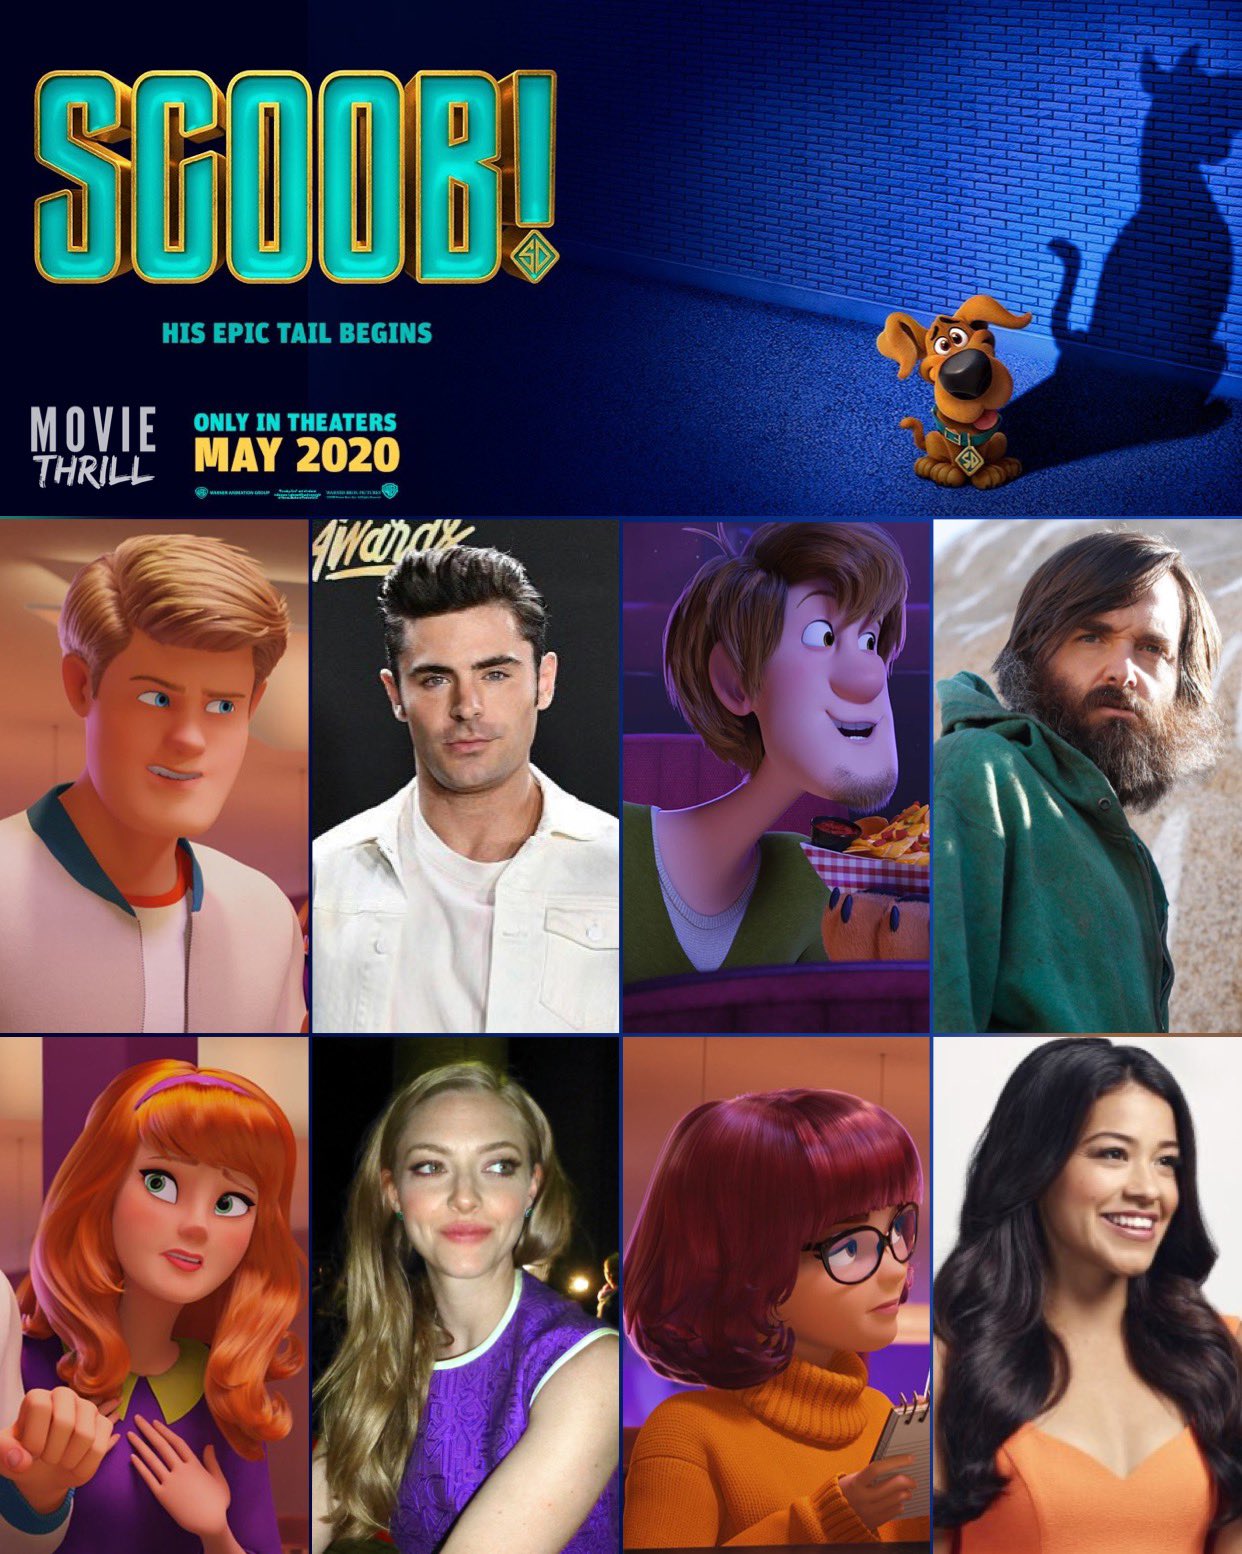 use me - The Reboot of Scooby-Doo in 3D is Coming! - Images, Trailer and Debut Details Revealed